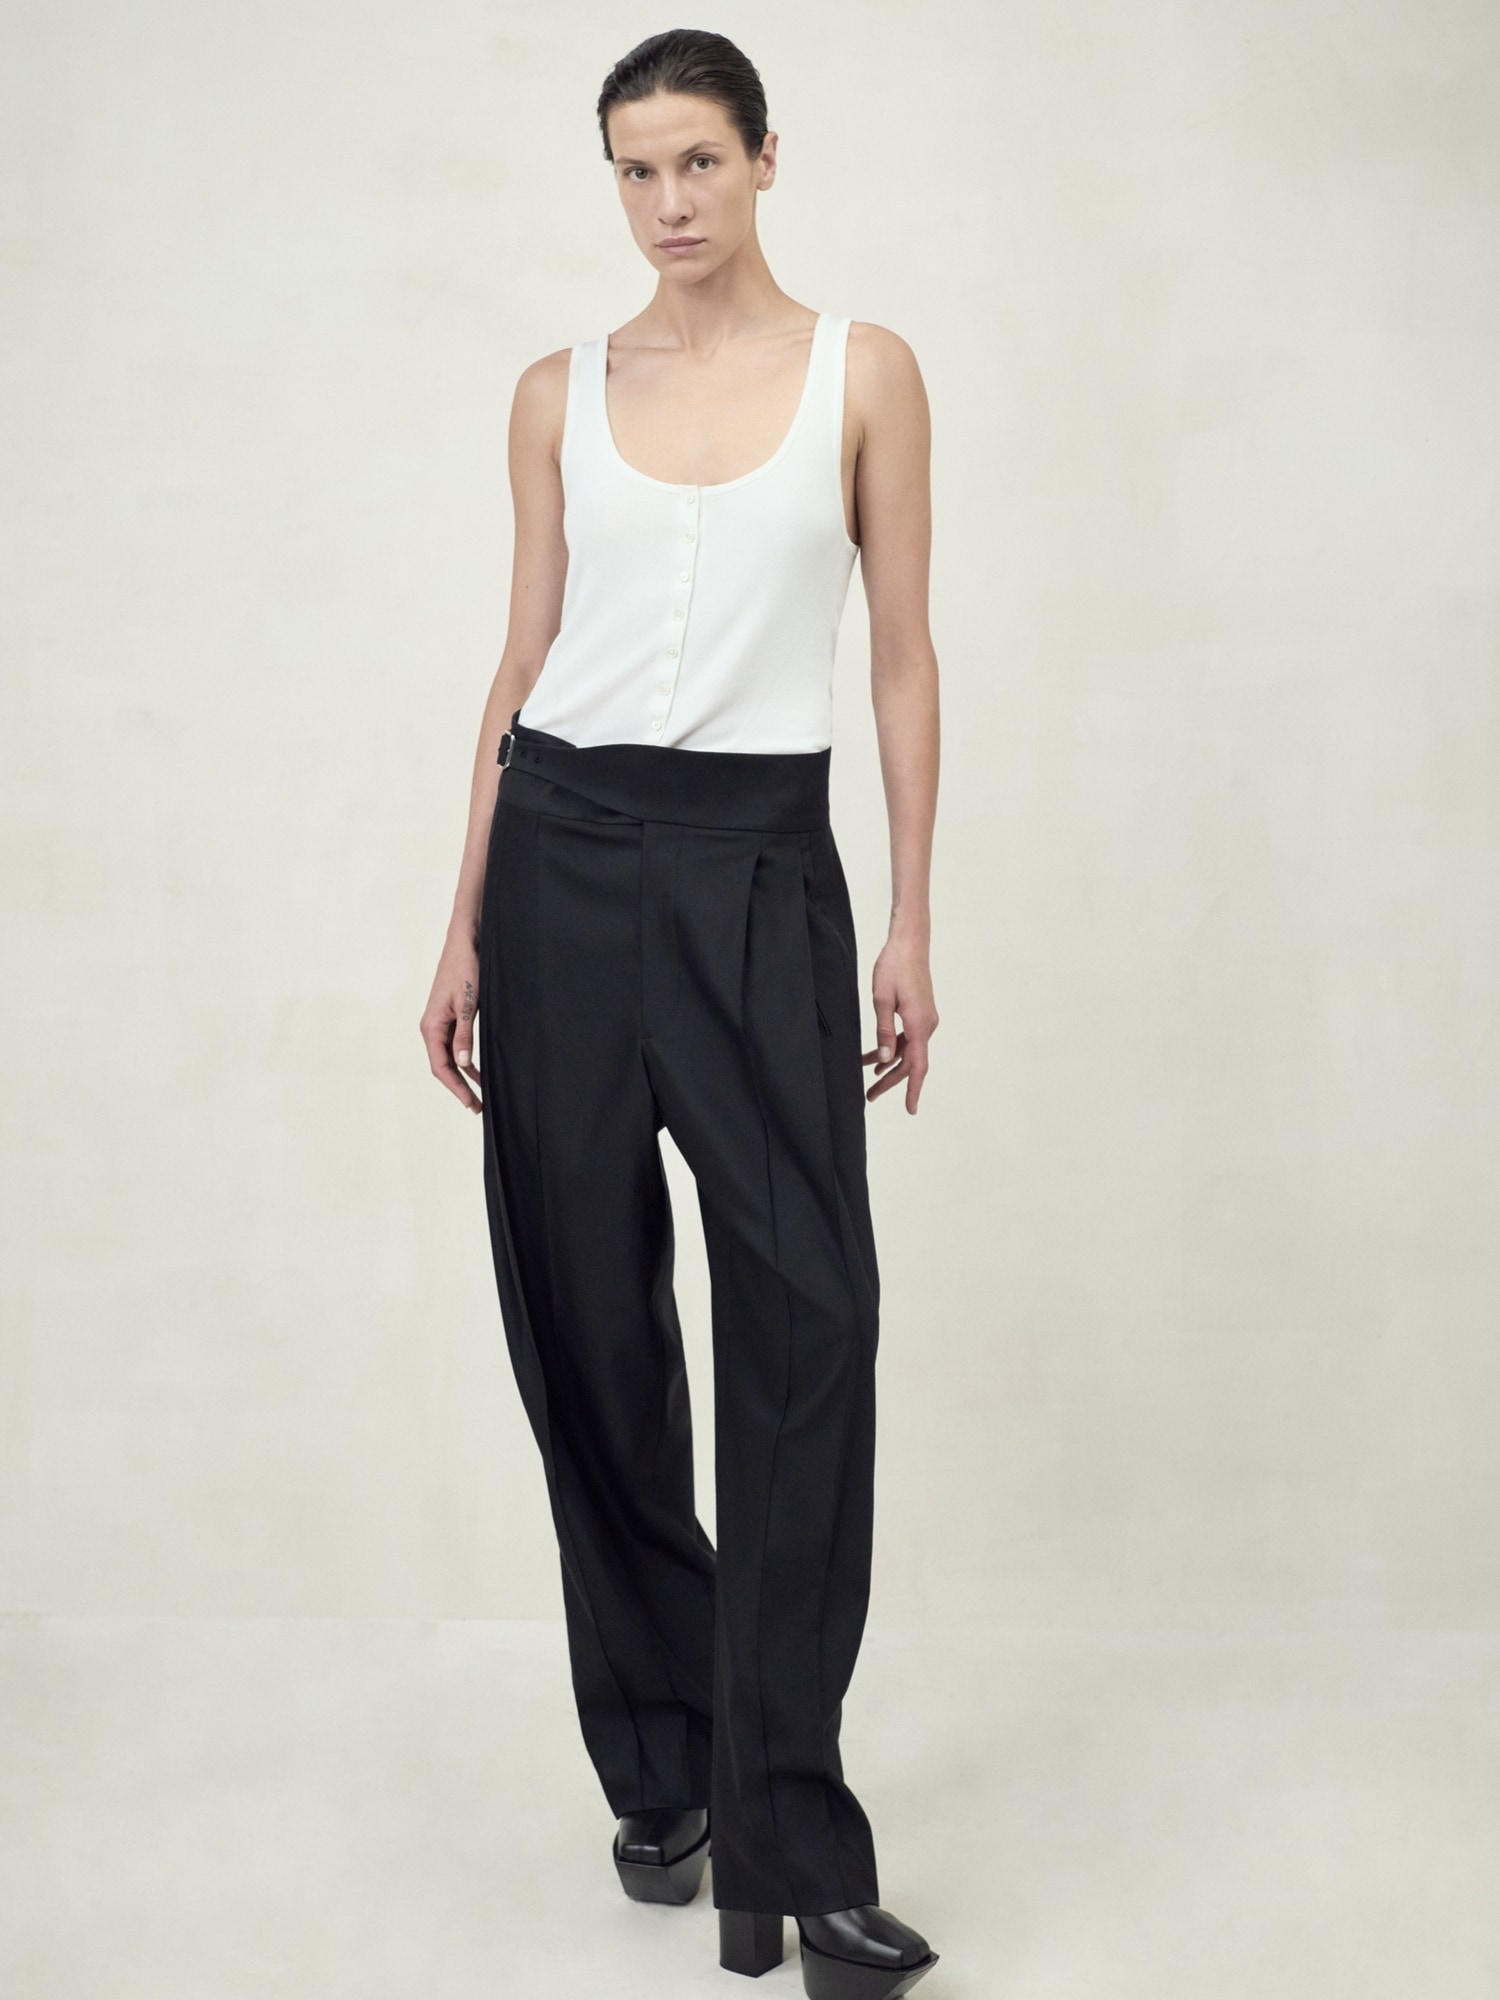 Buy Banana Republic Nessa Straight trousers from the Gap online shop